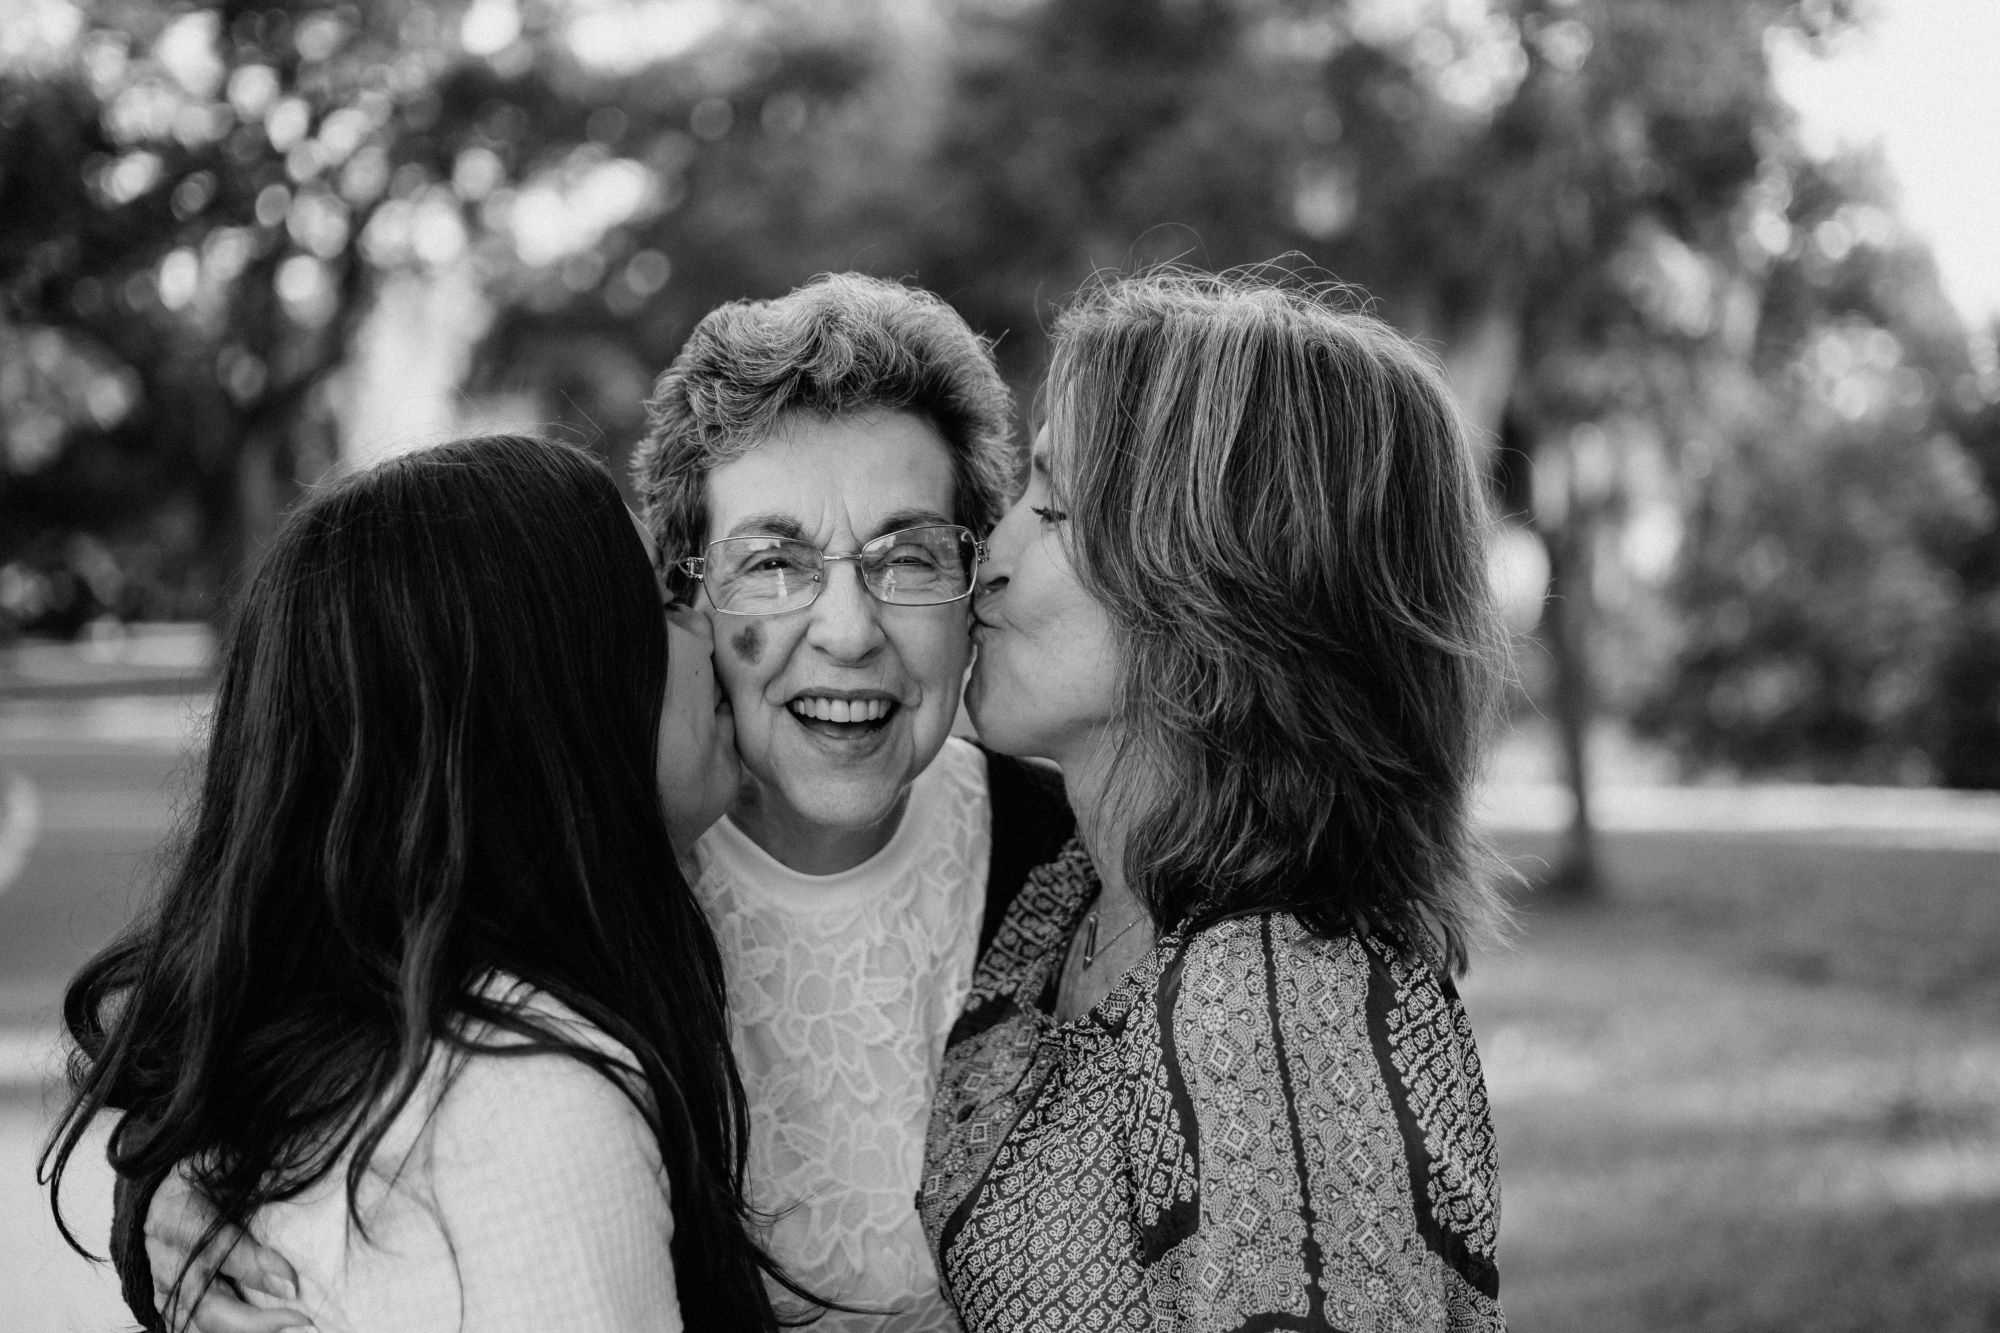 Elaine, her mom, and her daughter - a sandwich generation